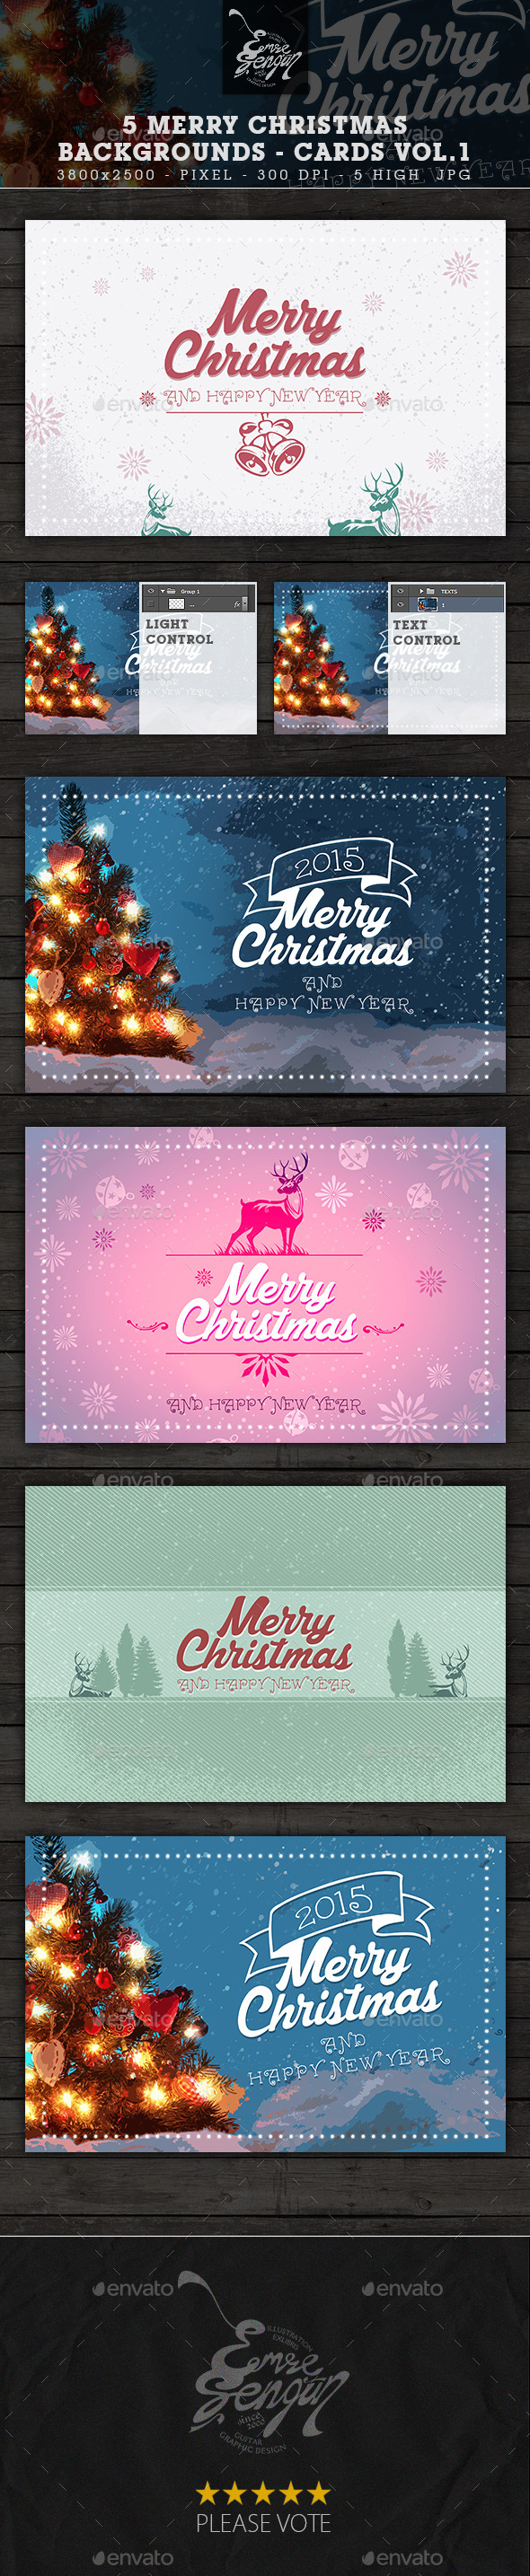 Merry Christmas Backgrounds - Cards Vol.1